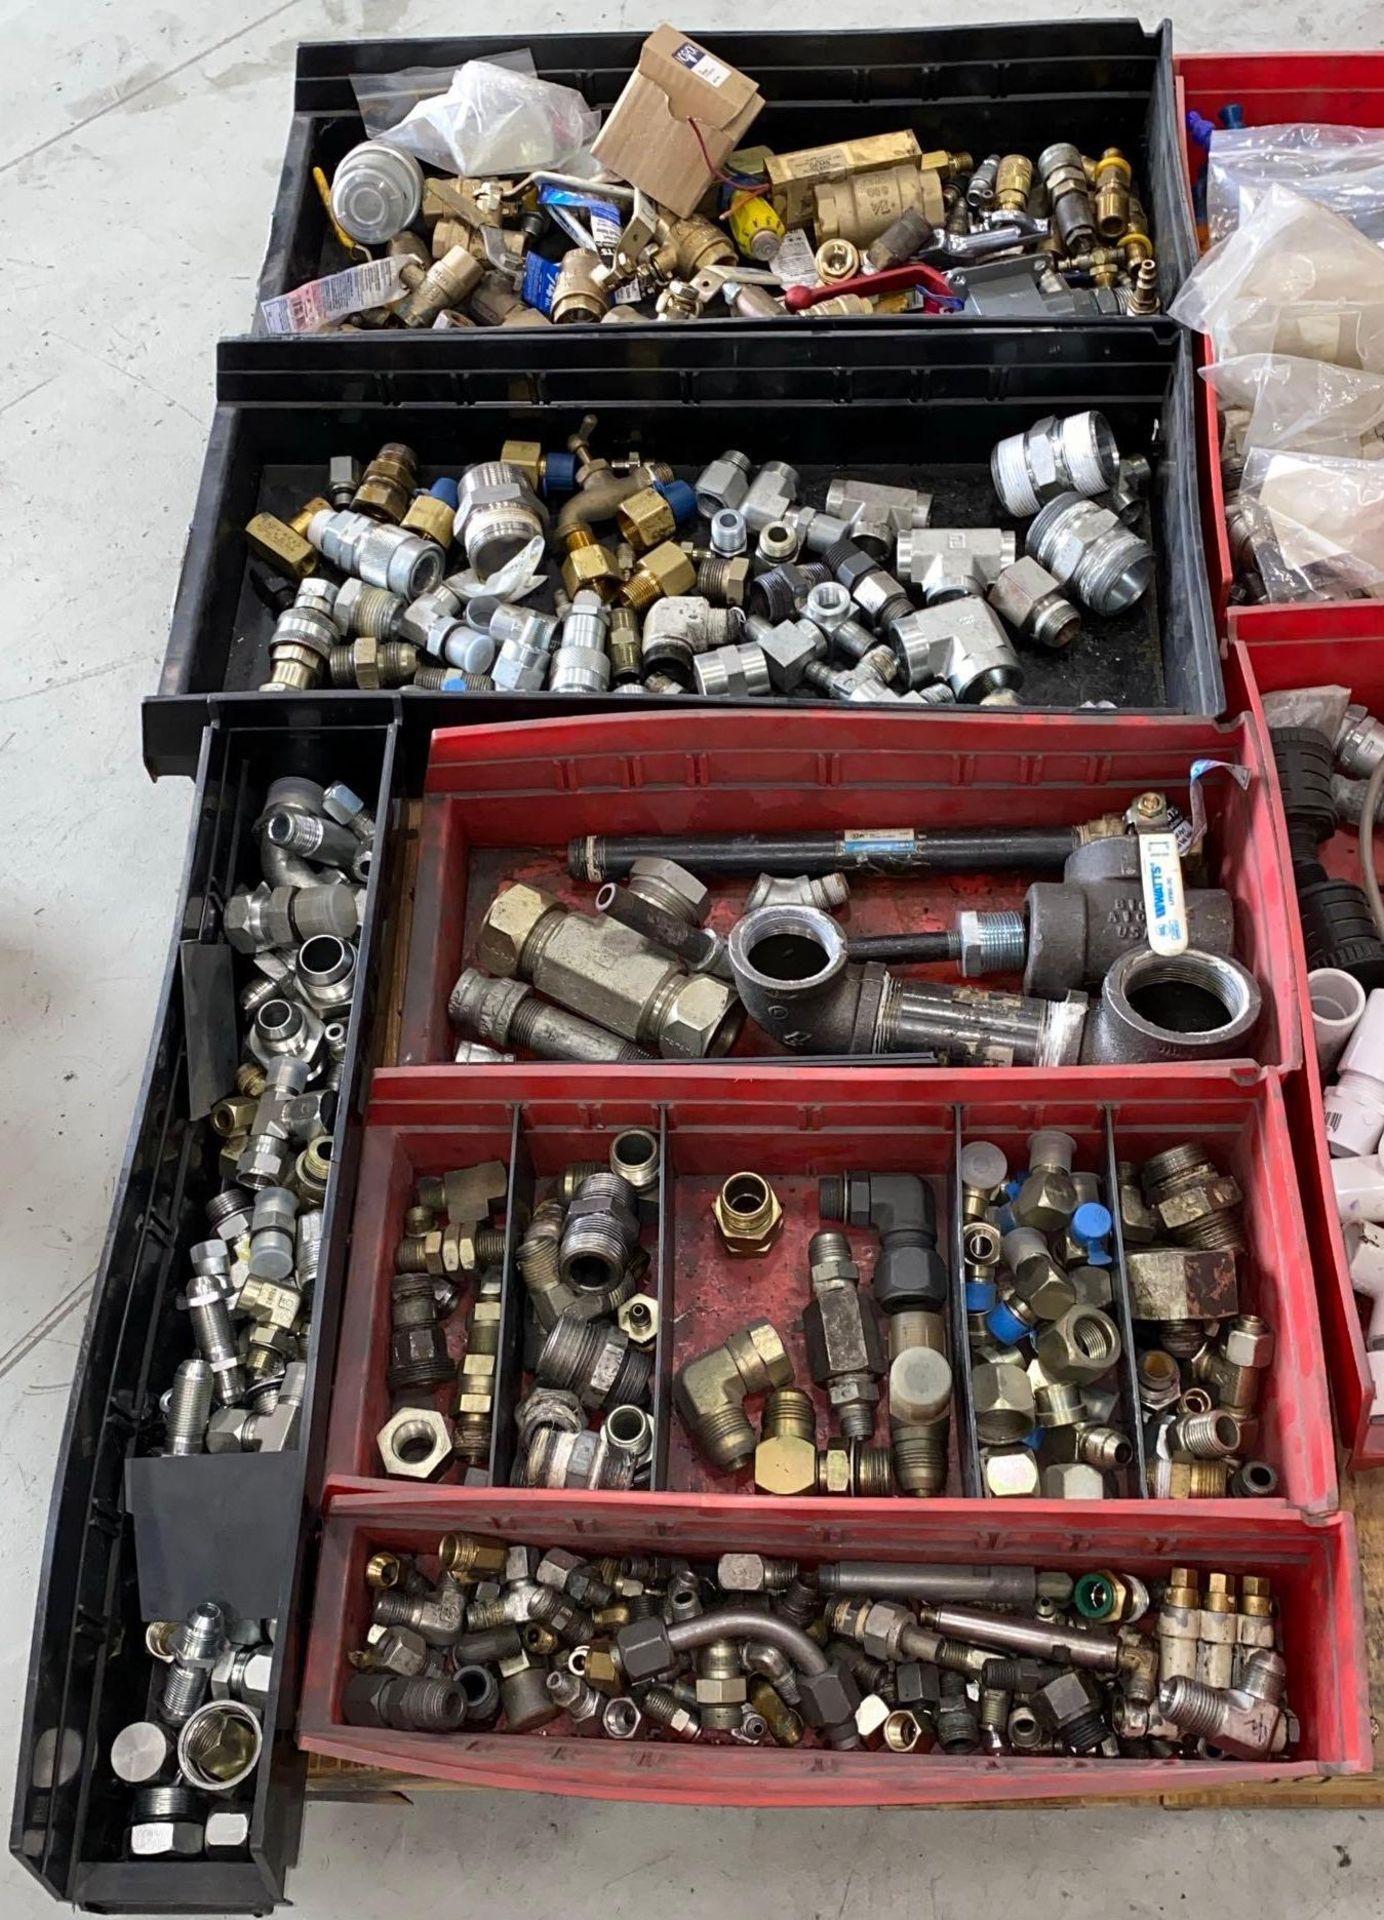 Skid / Lot of Misc. Pipe Fittings, Valves, Nipples, Misc. Fittings - Image 6 of 6